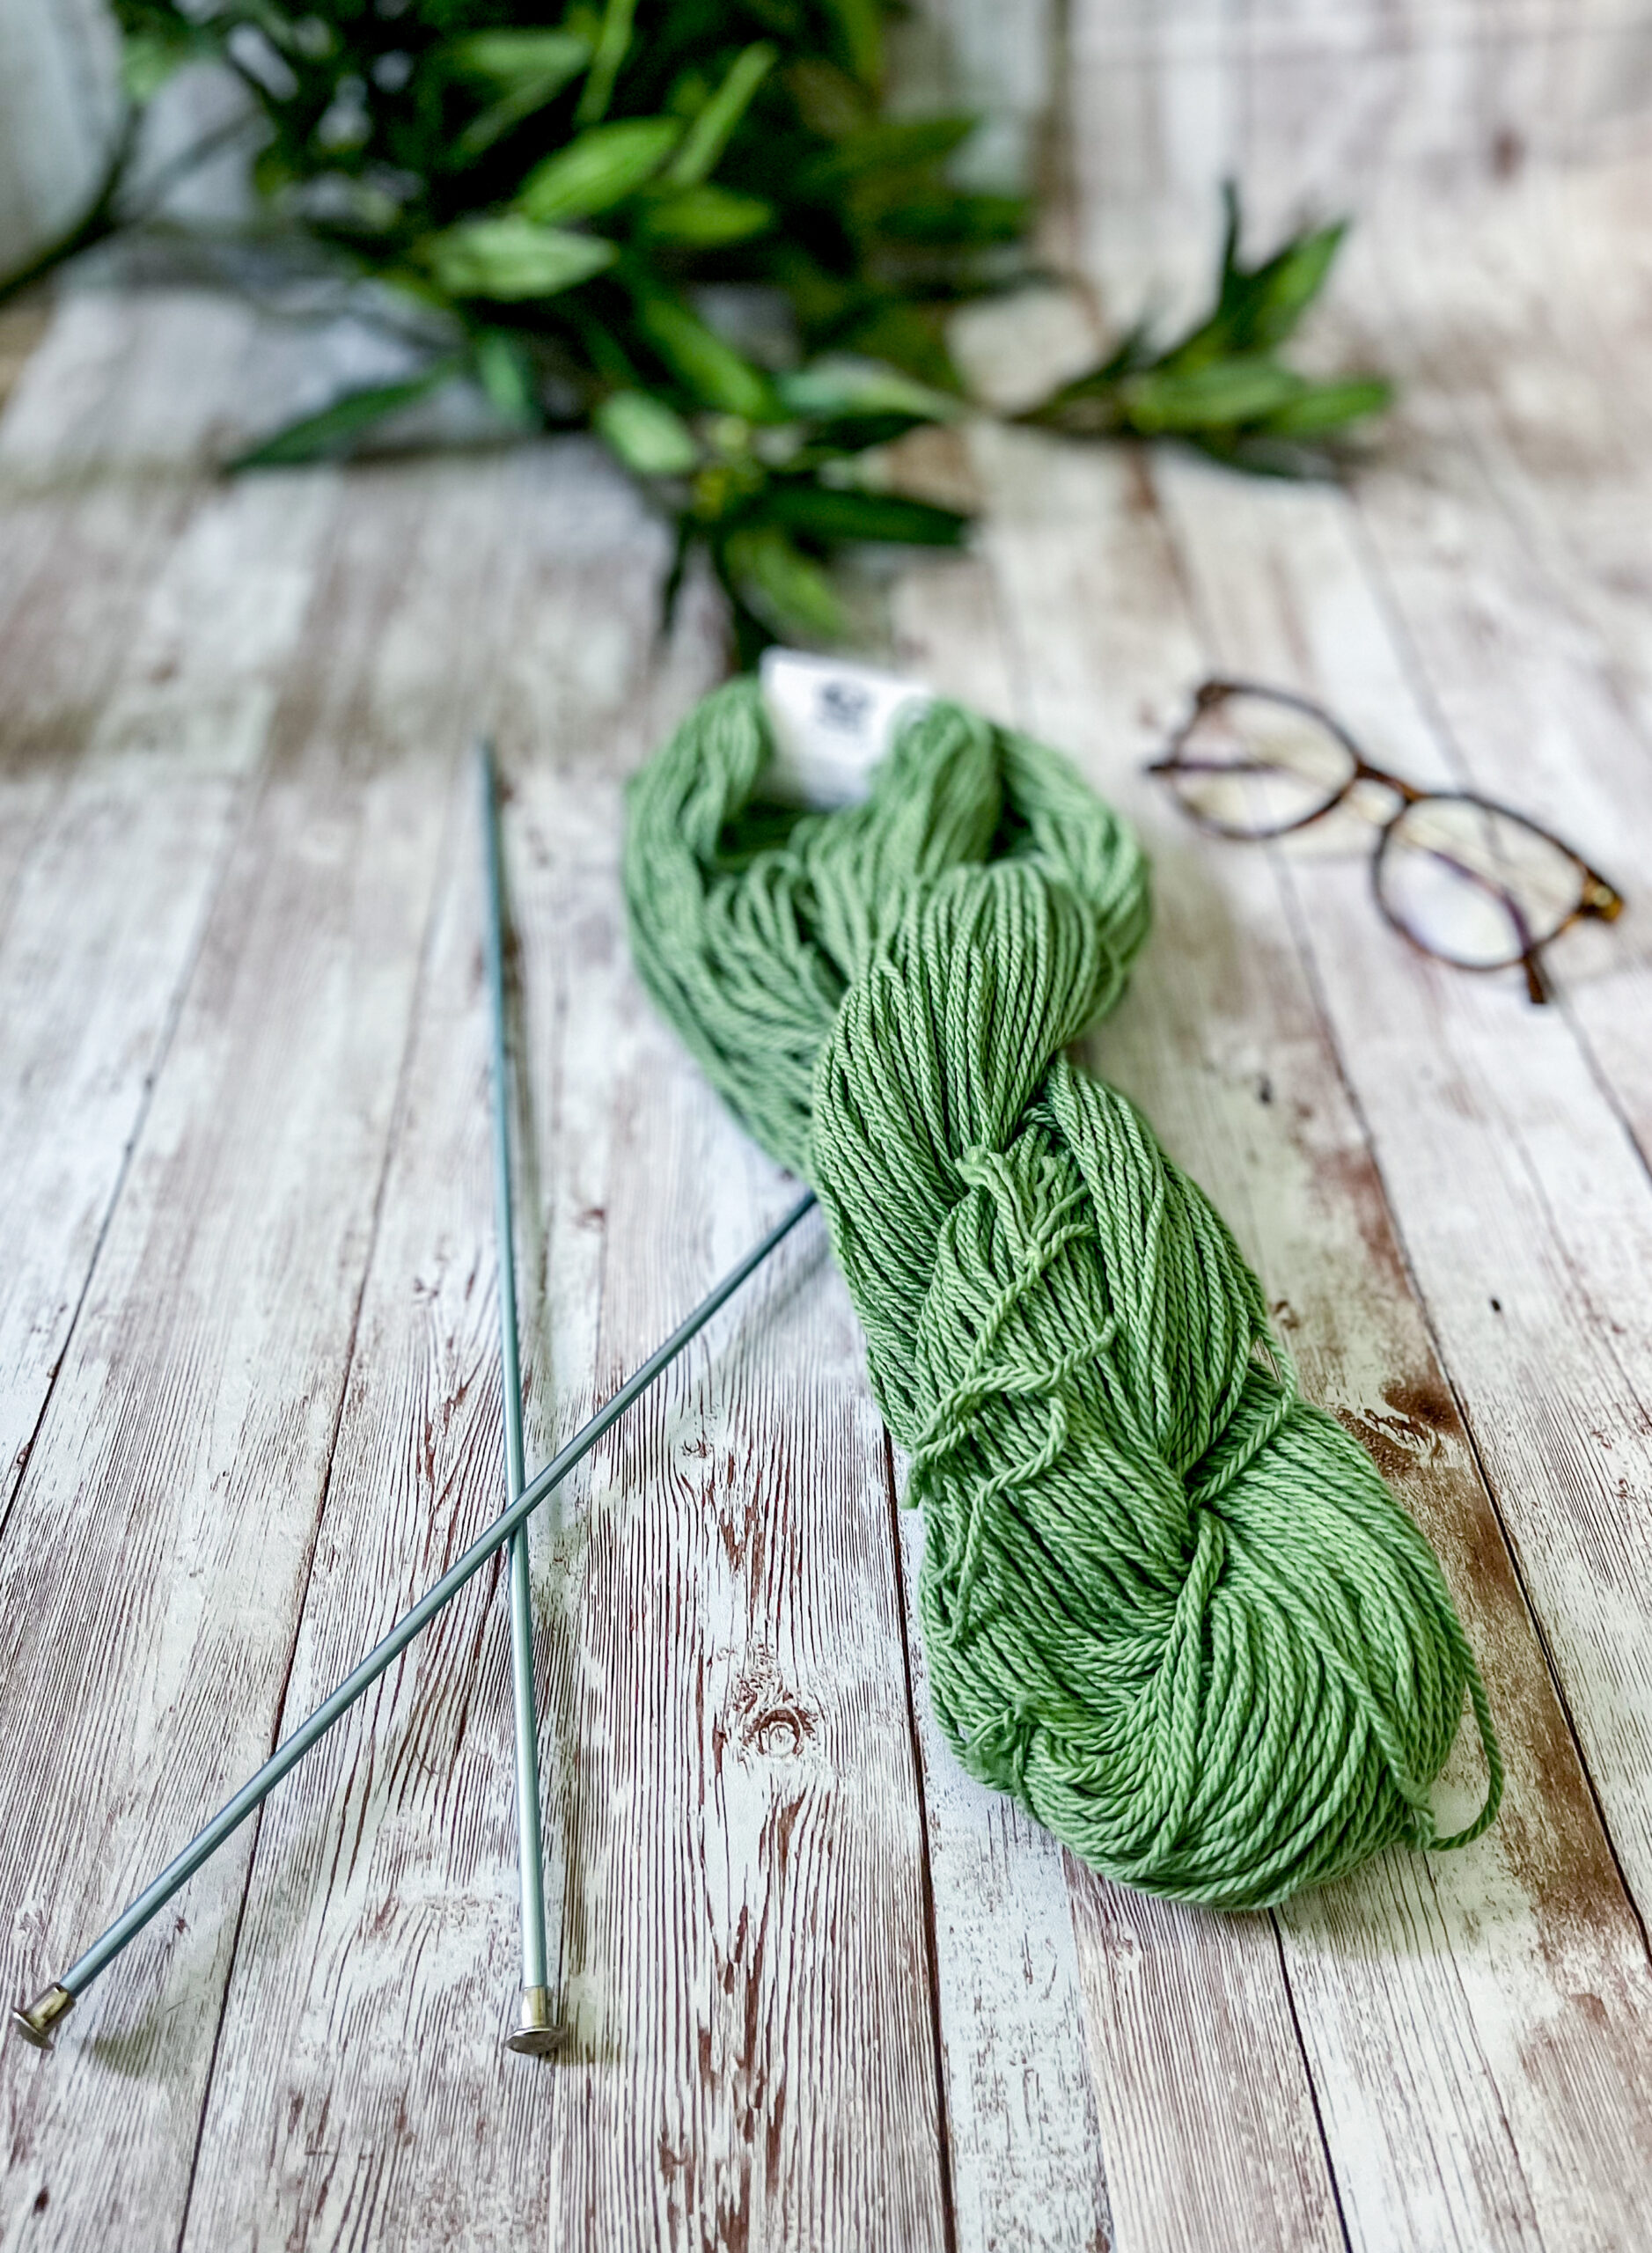 A skein of green Virginia-grown cotton rests on a wood panel, with a pair of knitting needles, reading glasses and greenery around it